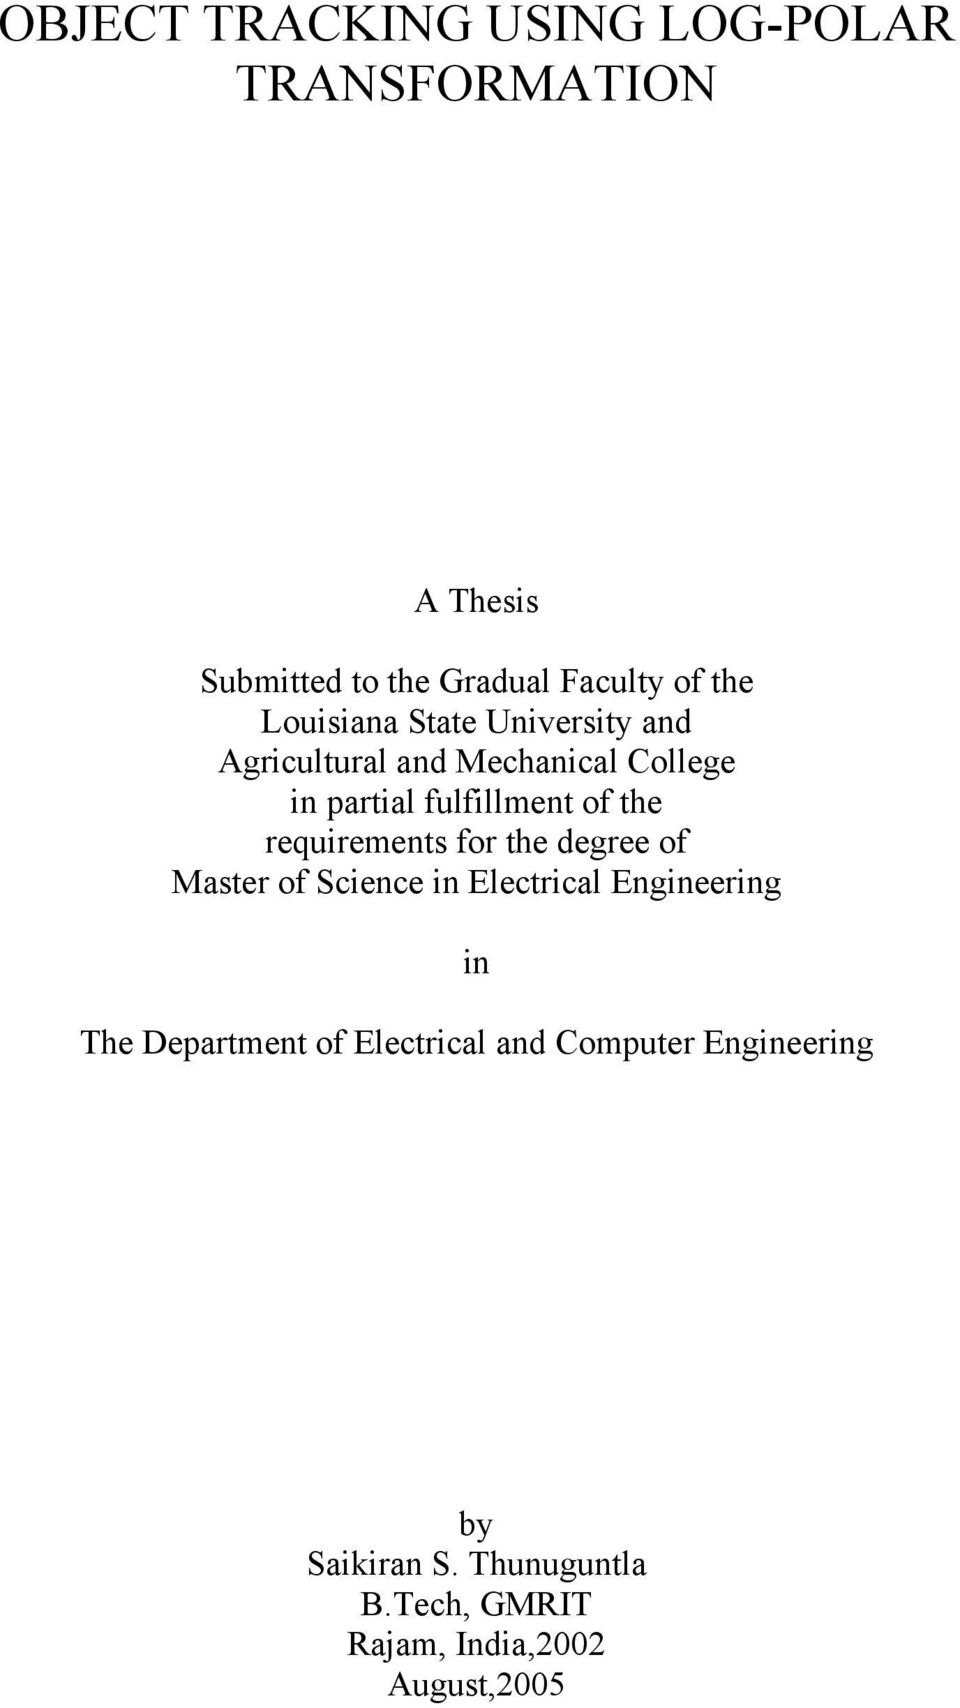 requirements for the degree of Master of Science in Electrical Engineering in The Department of